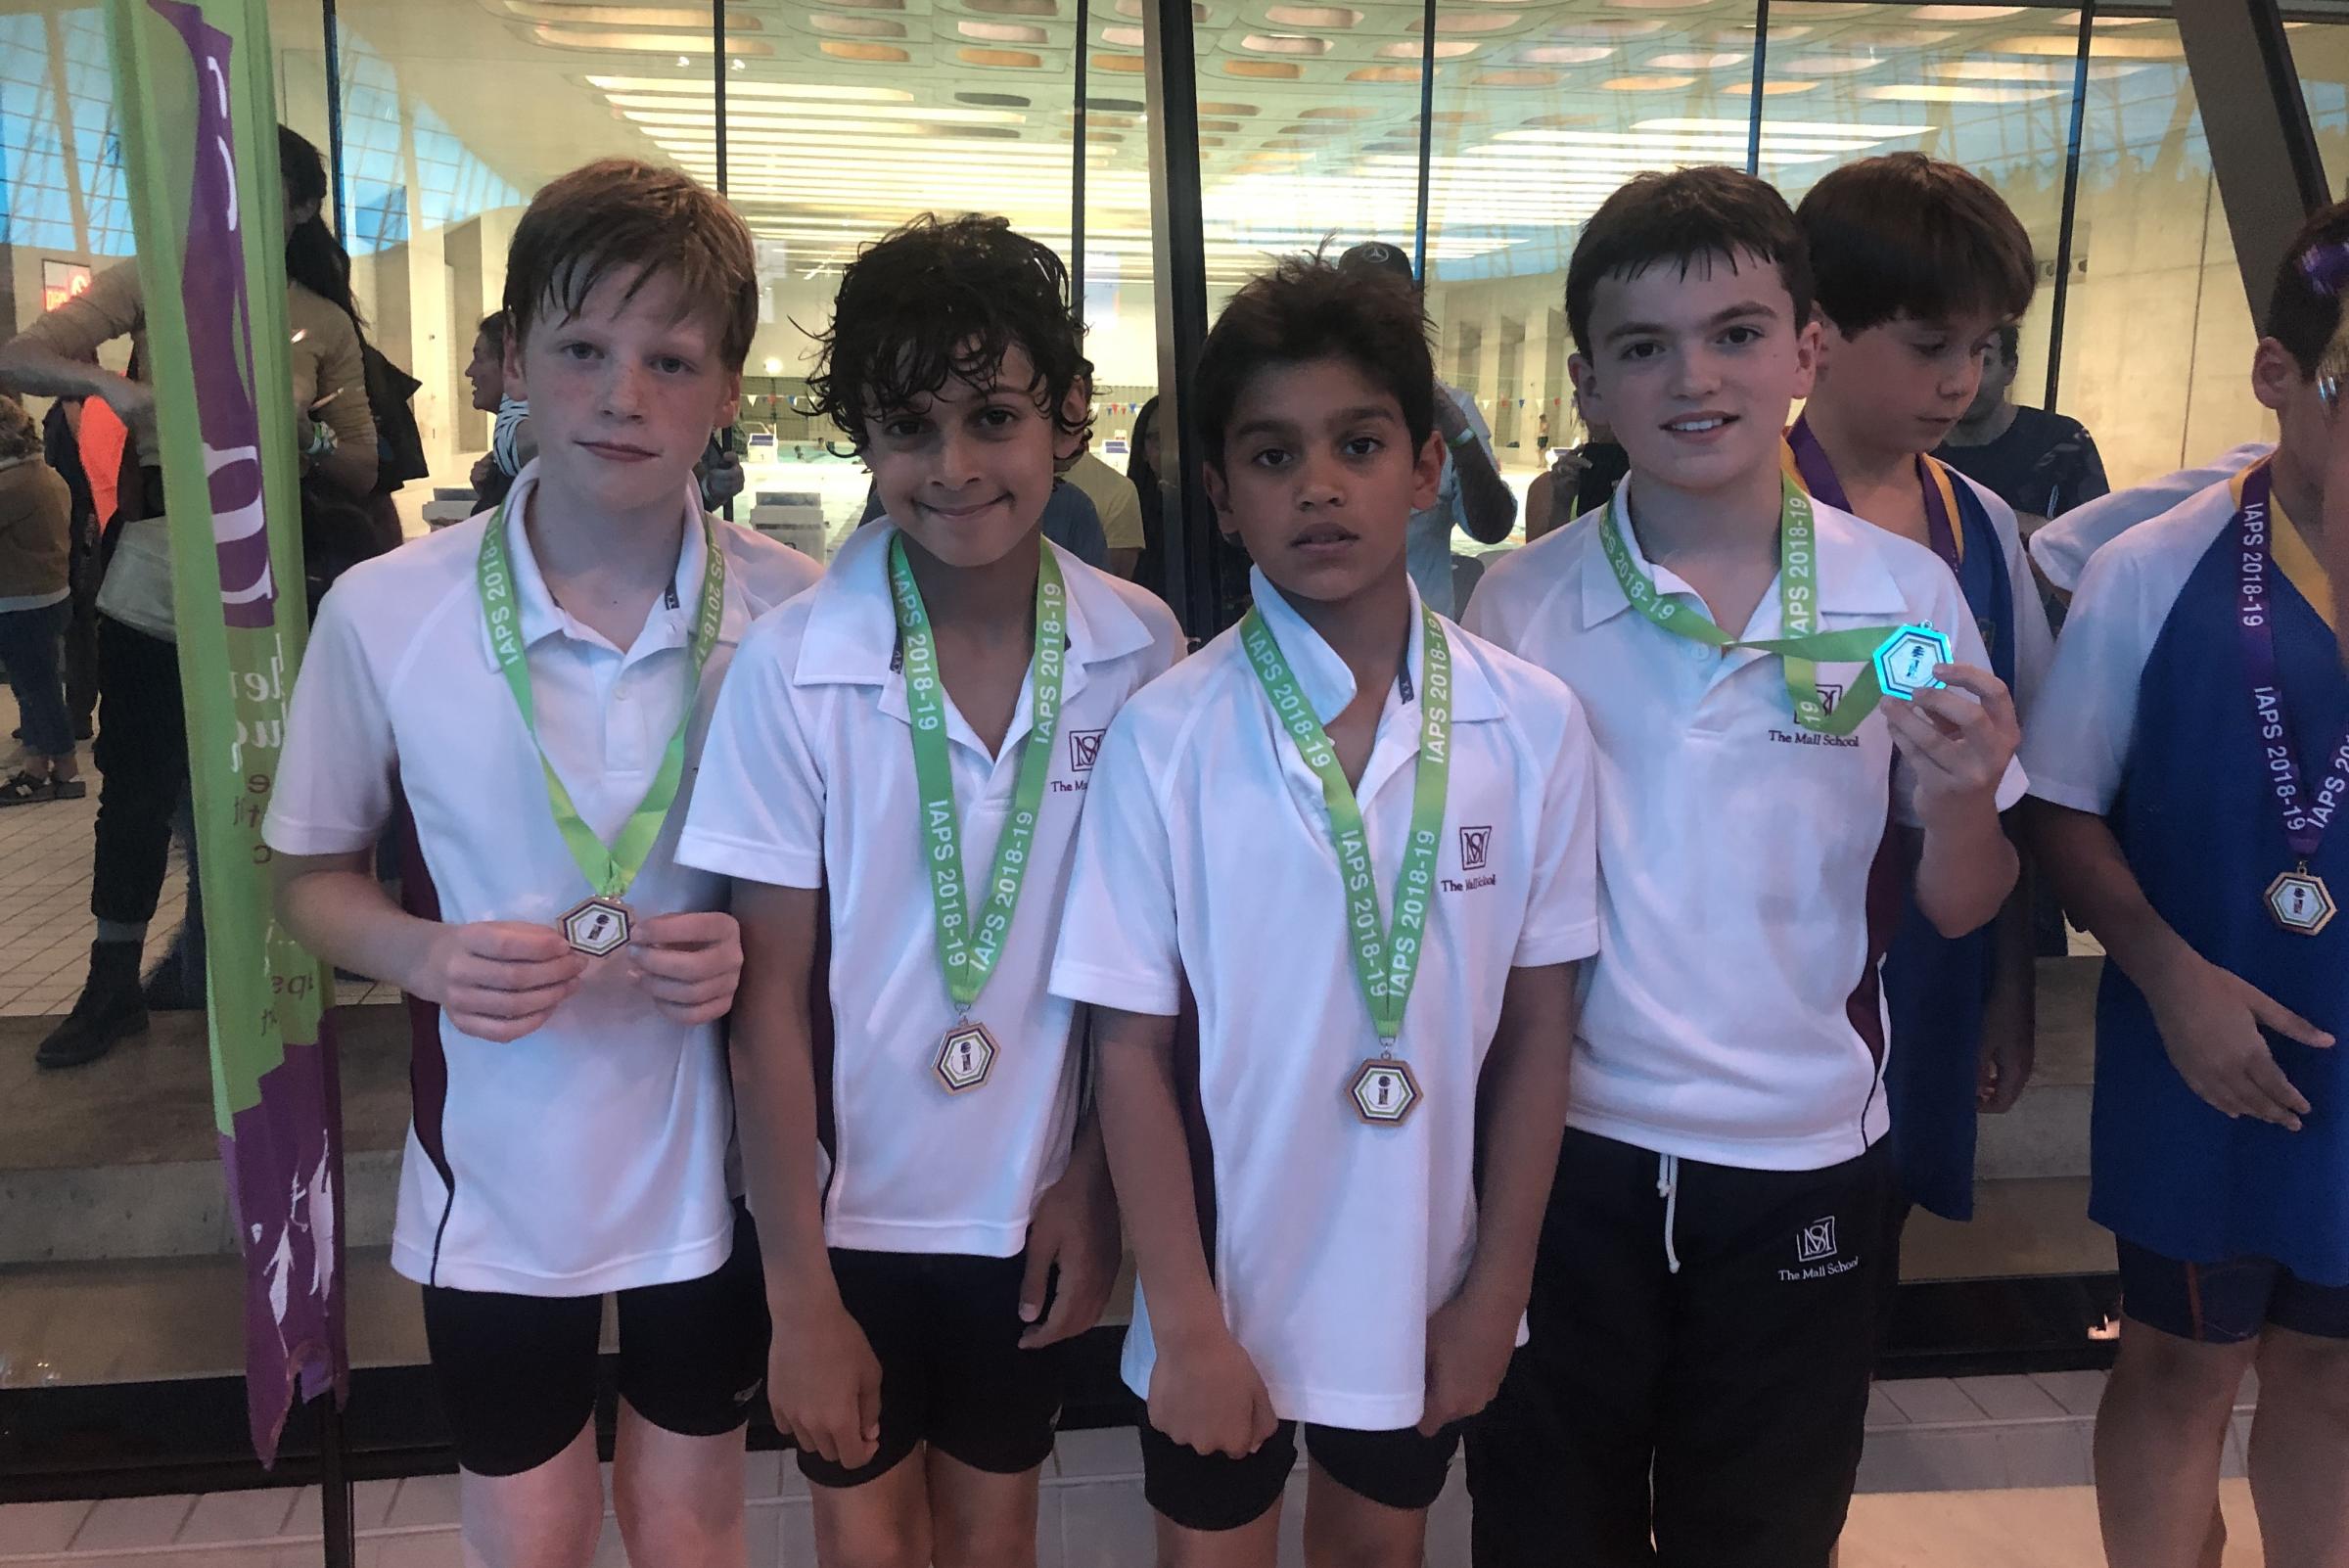 Pupils from The Mall School are swimming stars after competition success